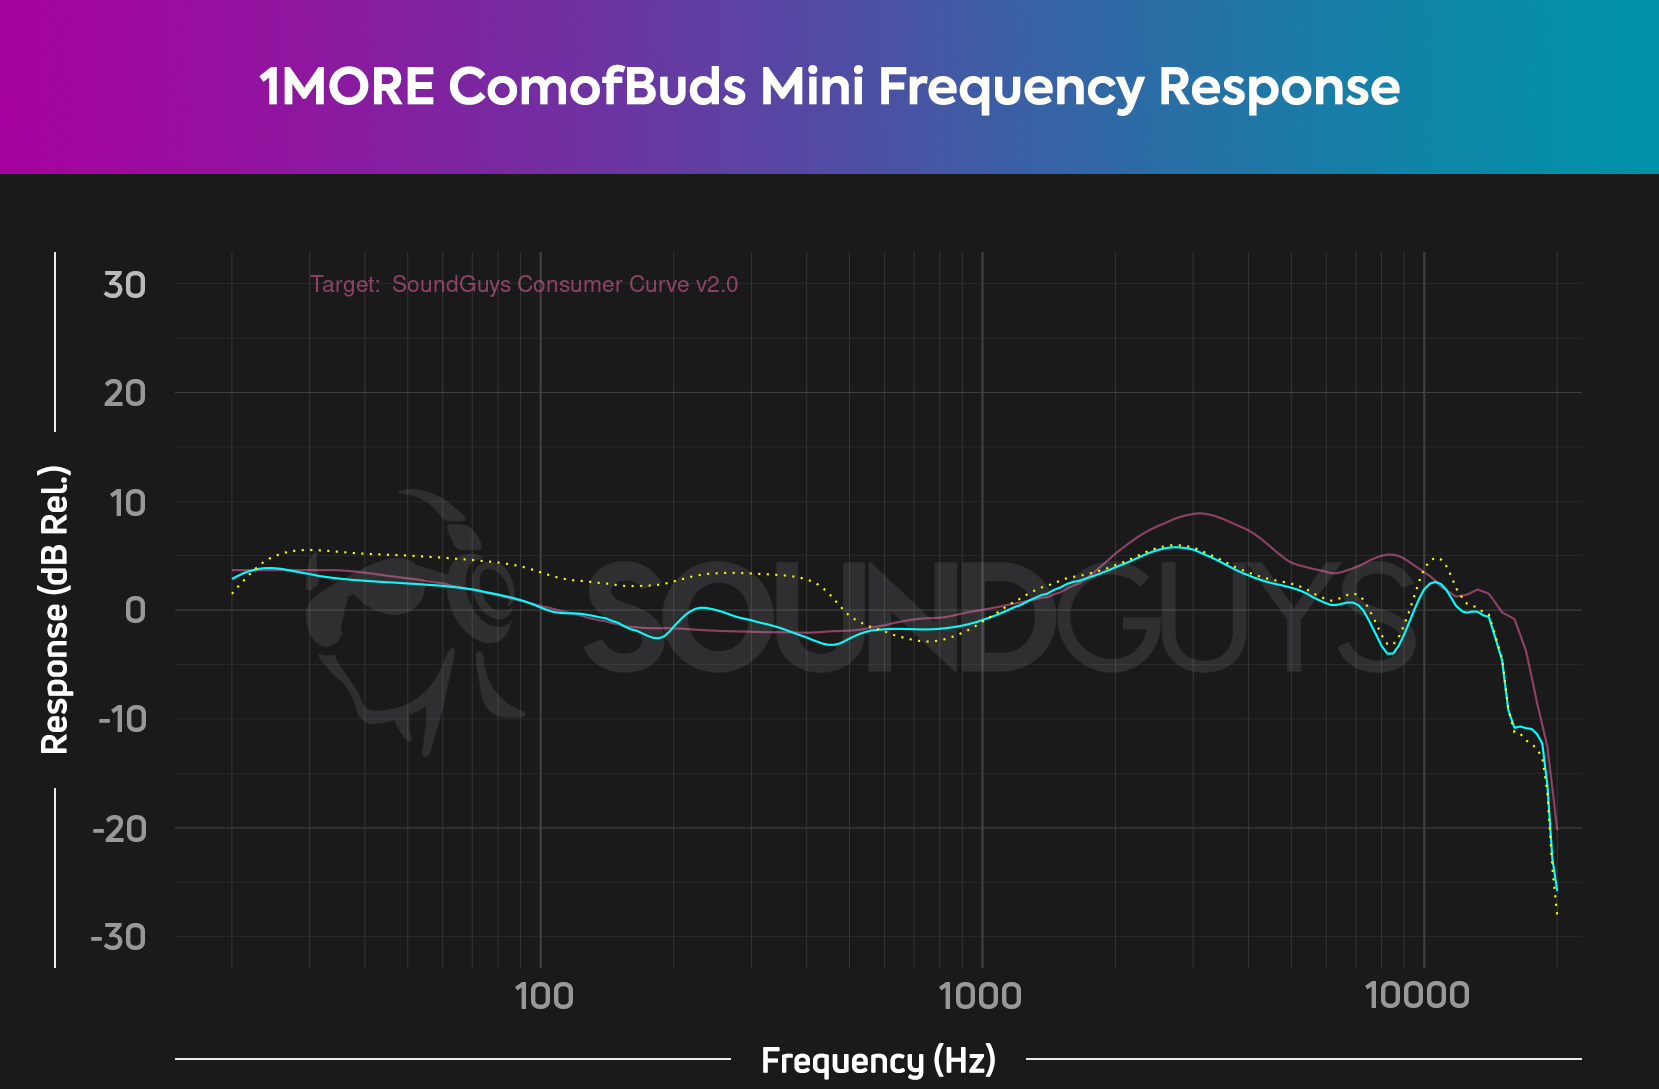 1MORE ComfoBuds Mini frequency chart